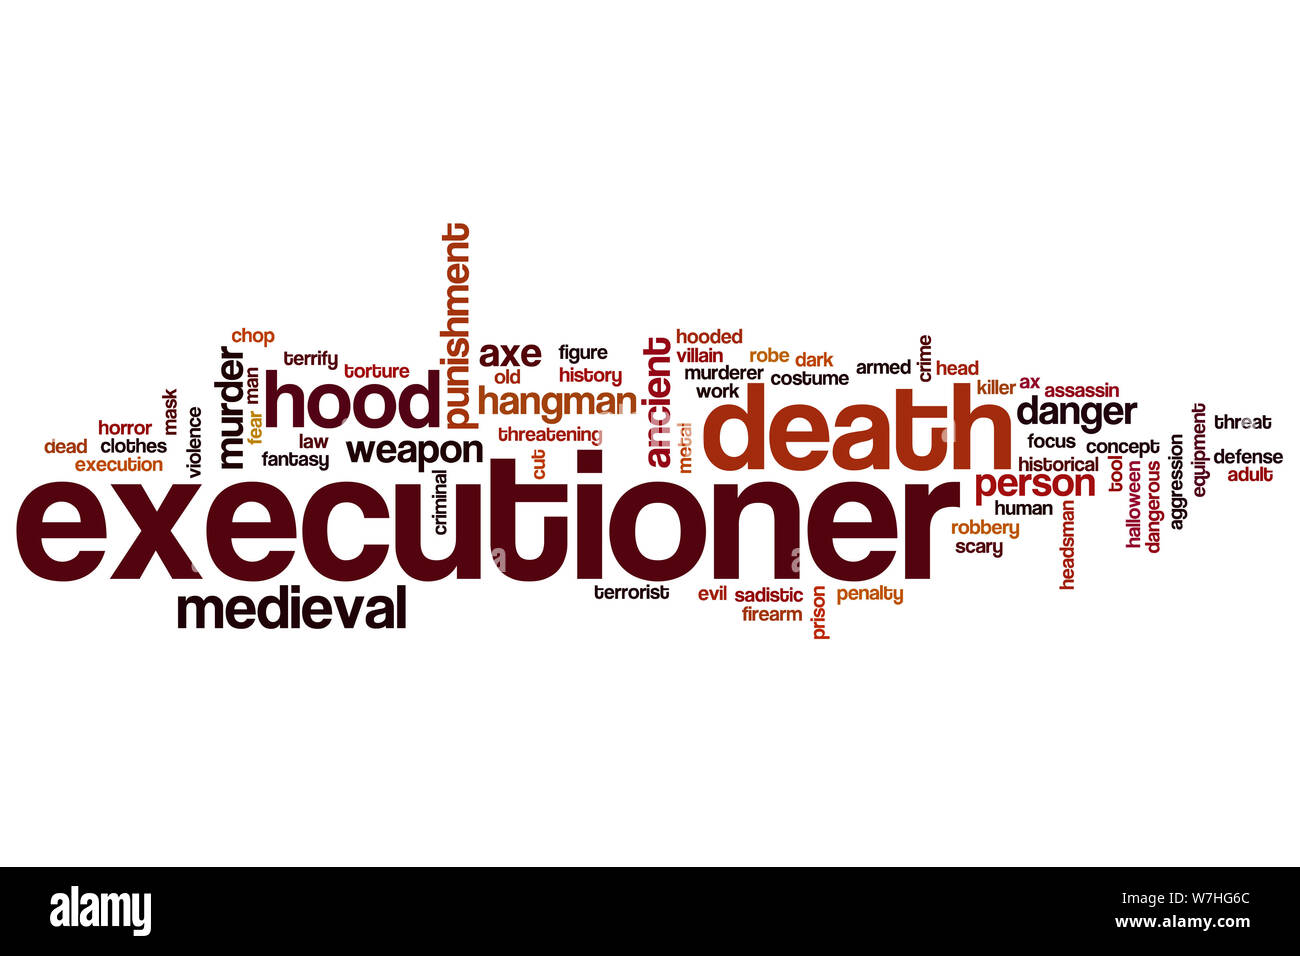 Executioner word cloud concept Stock Photo